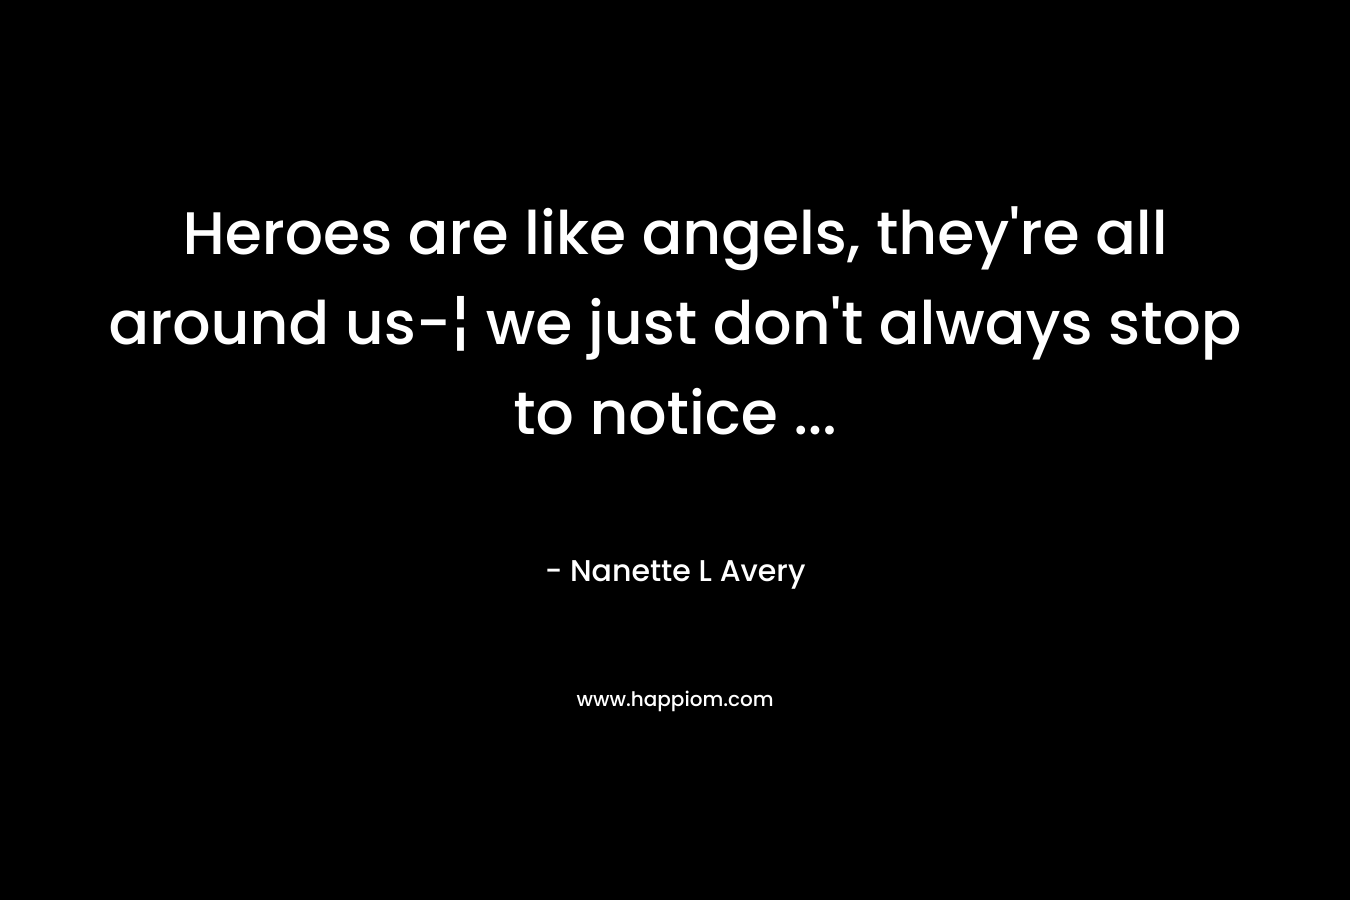 Heroes are like angels, they’re all around us-¦ we just don’t always stop to notice … – Nanette L Avery